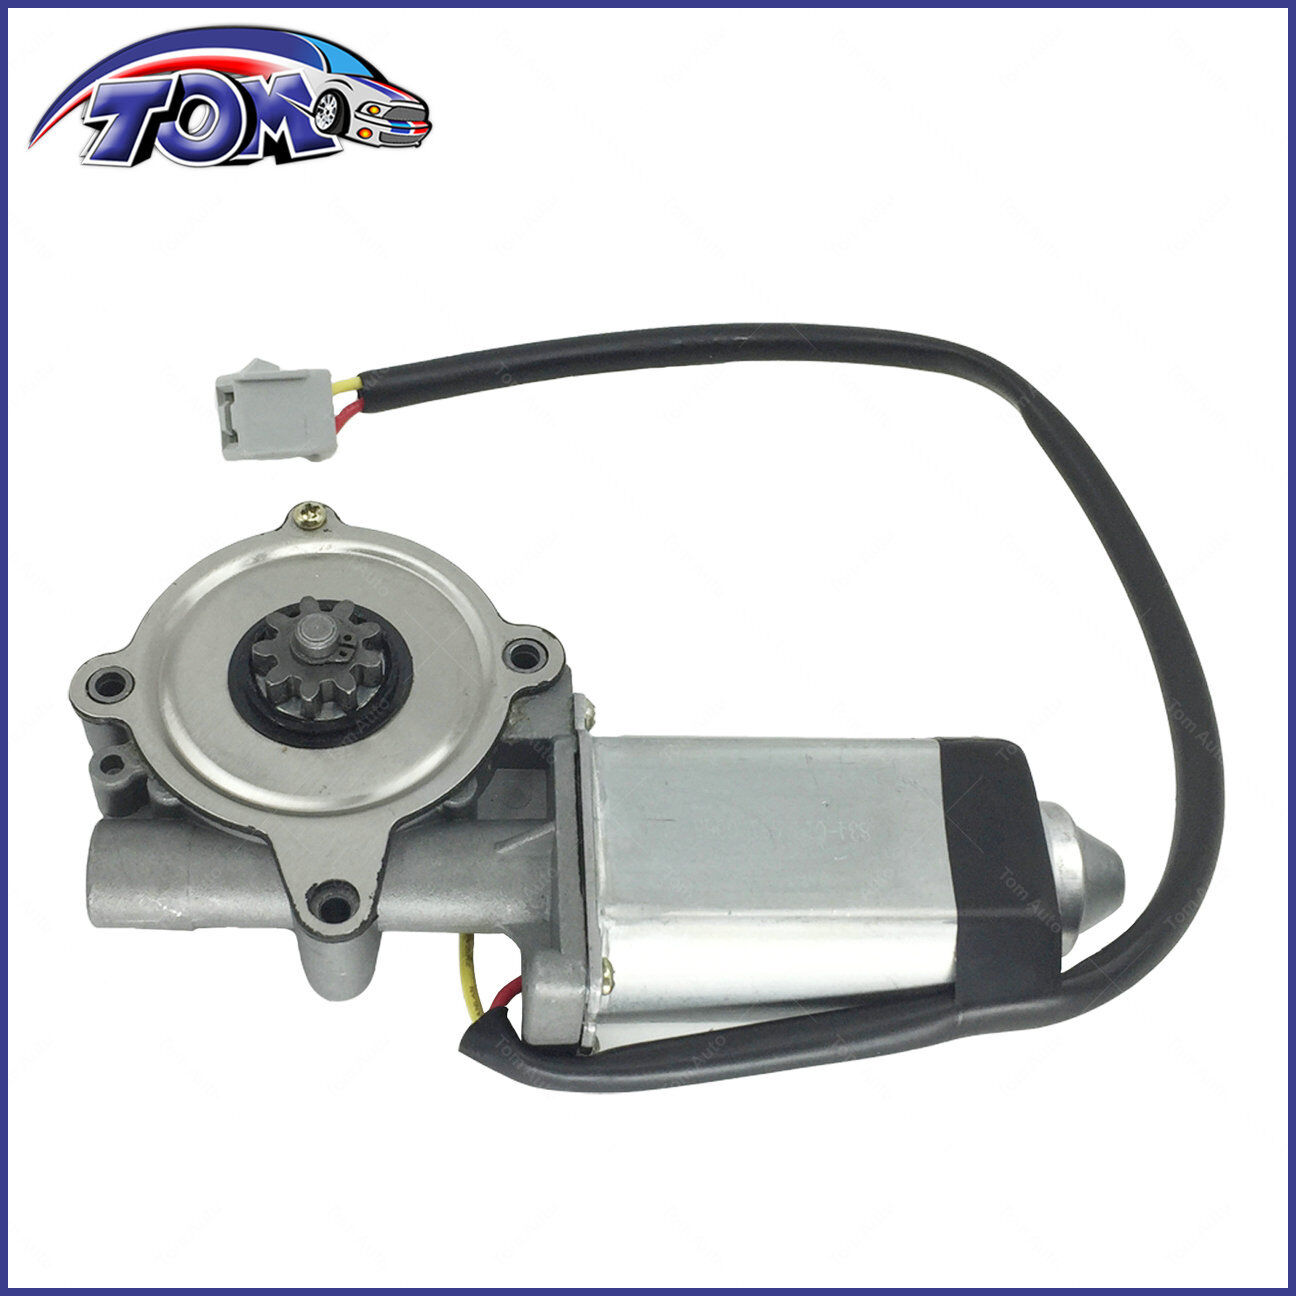 Brand New Power Window Motor Front-Left/Right For Ford F-150 F-250 F-350 83094